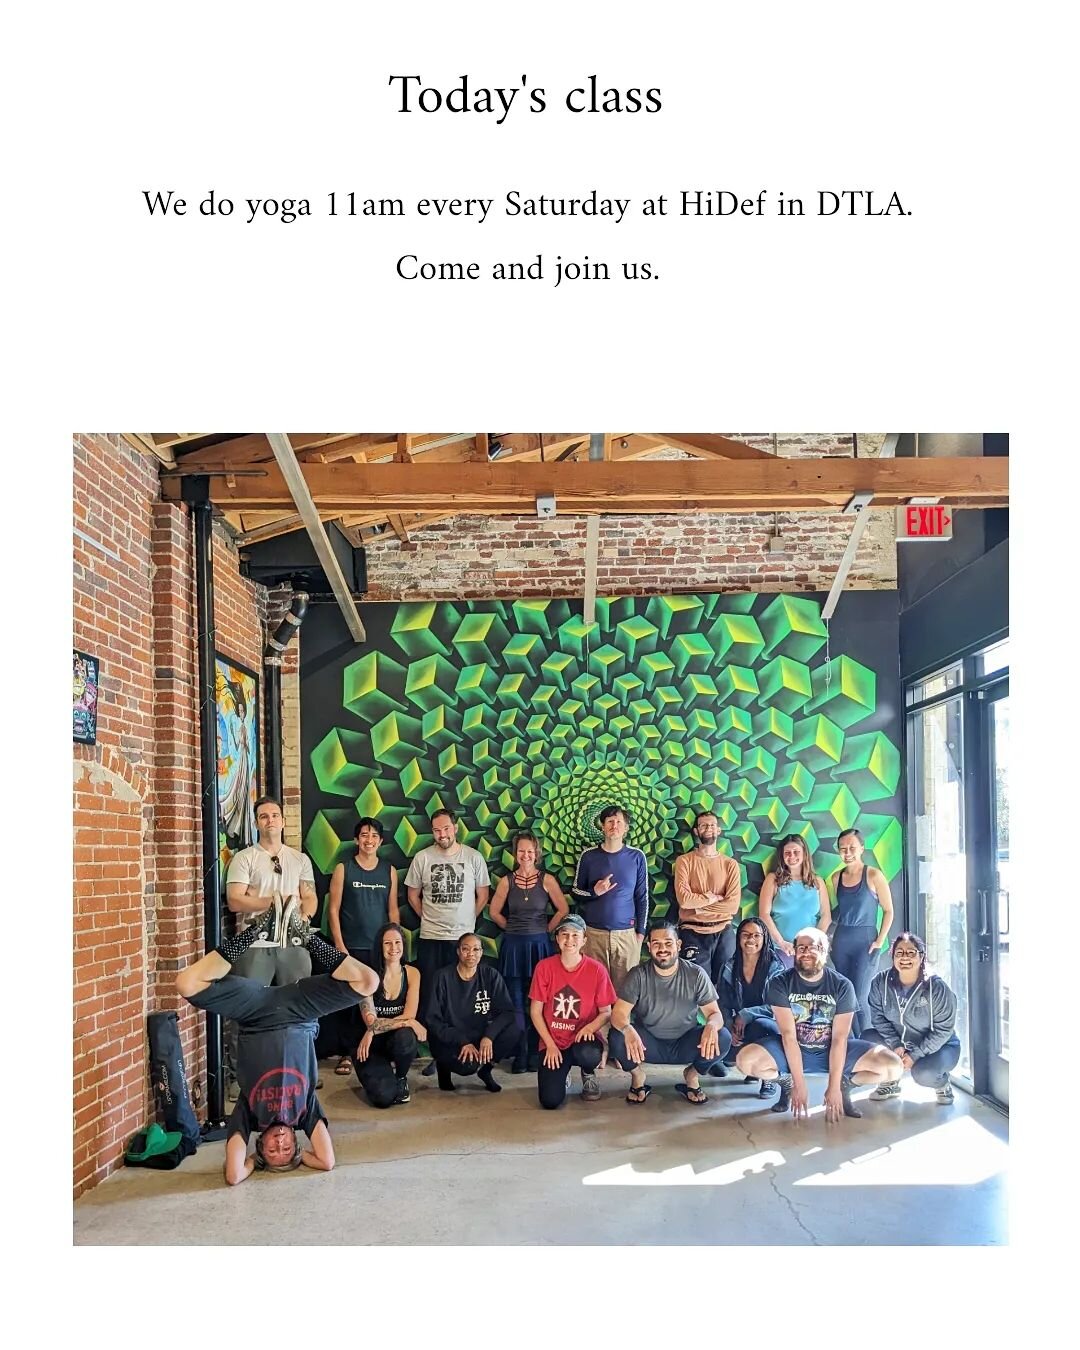 Do you like 🧘🏽&zwj;♂️ &amp; 🍺?

Today we added 🤘🏼.

Next Saturday is a classic vinyasa flow class. Come and join us.

11am Saturday at HiDef in DTLA.